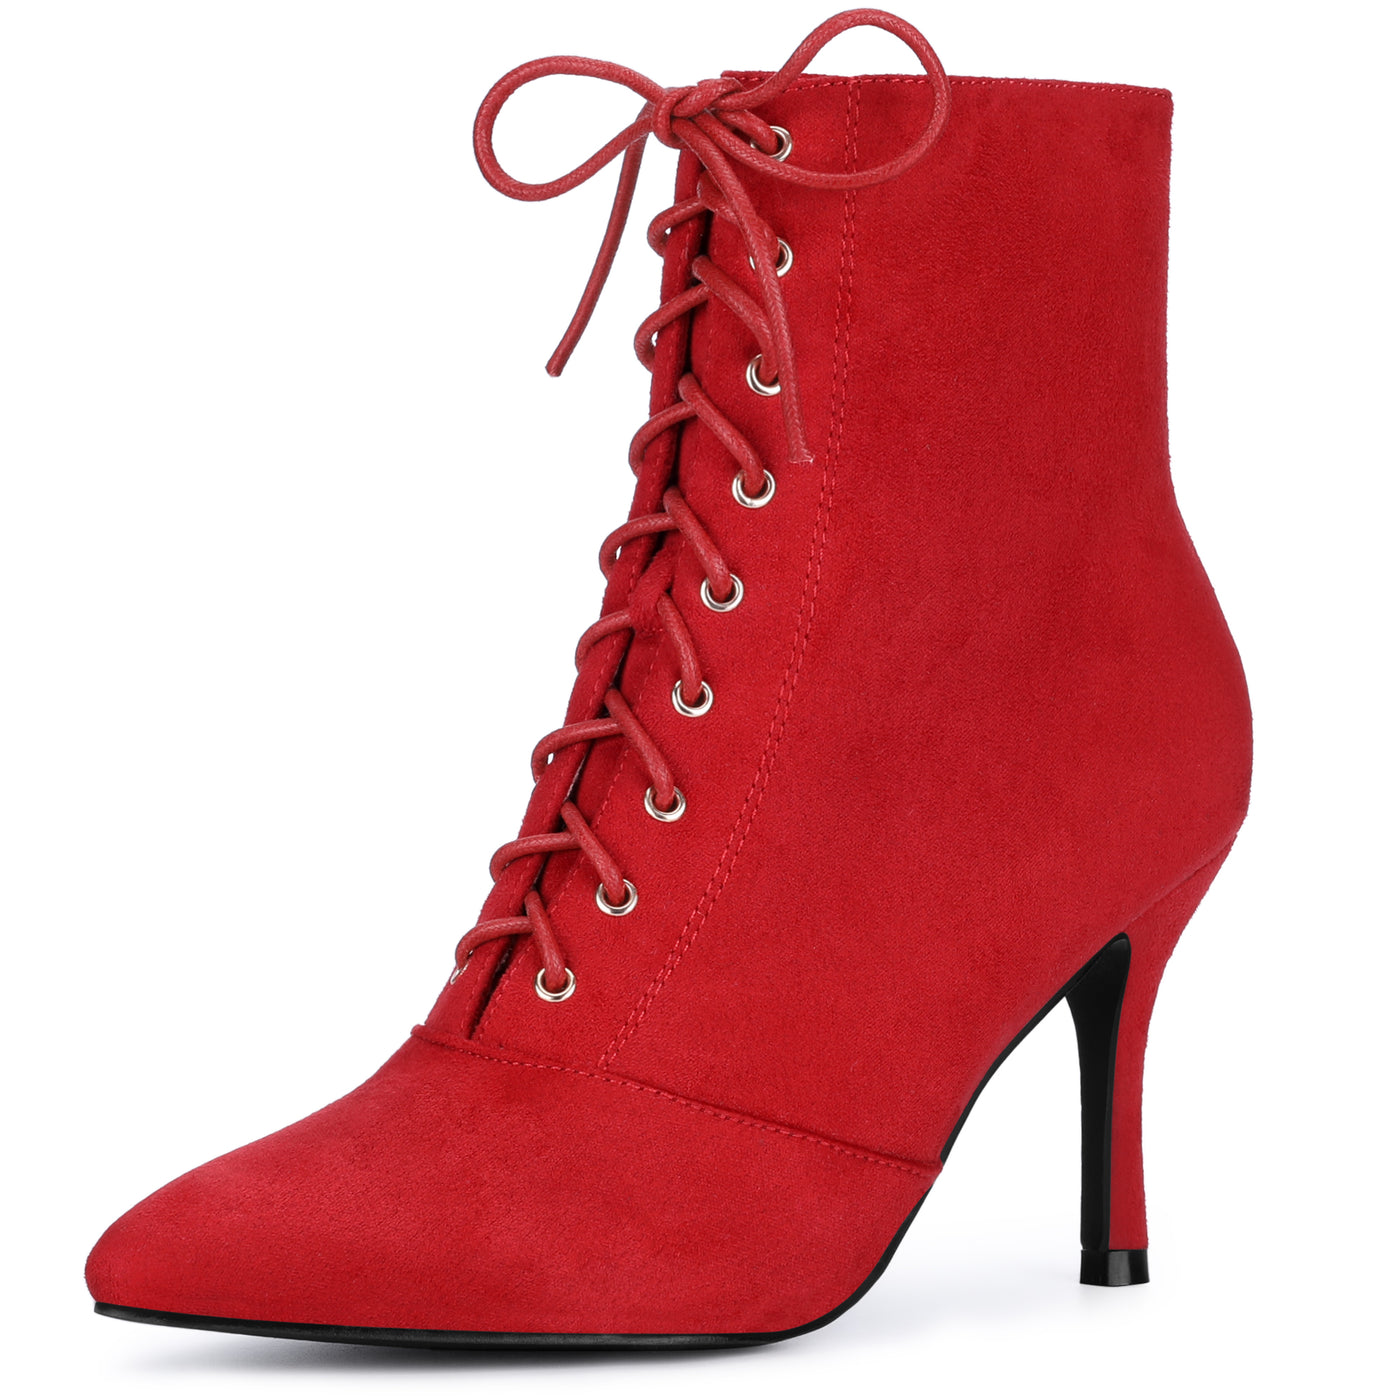 Allegra K Pointy Toe Lace Up Side Zip Stiletto Heel Ankle Boots